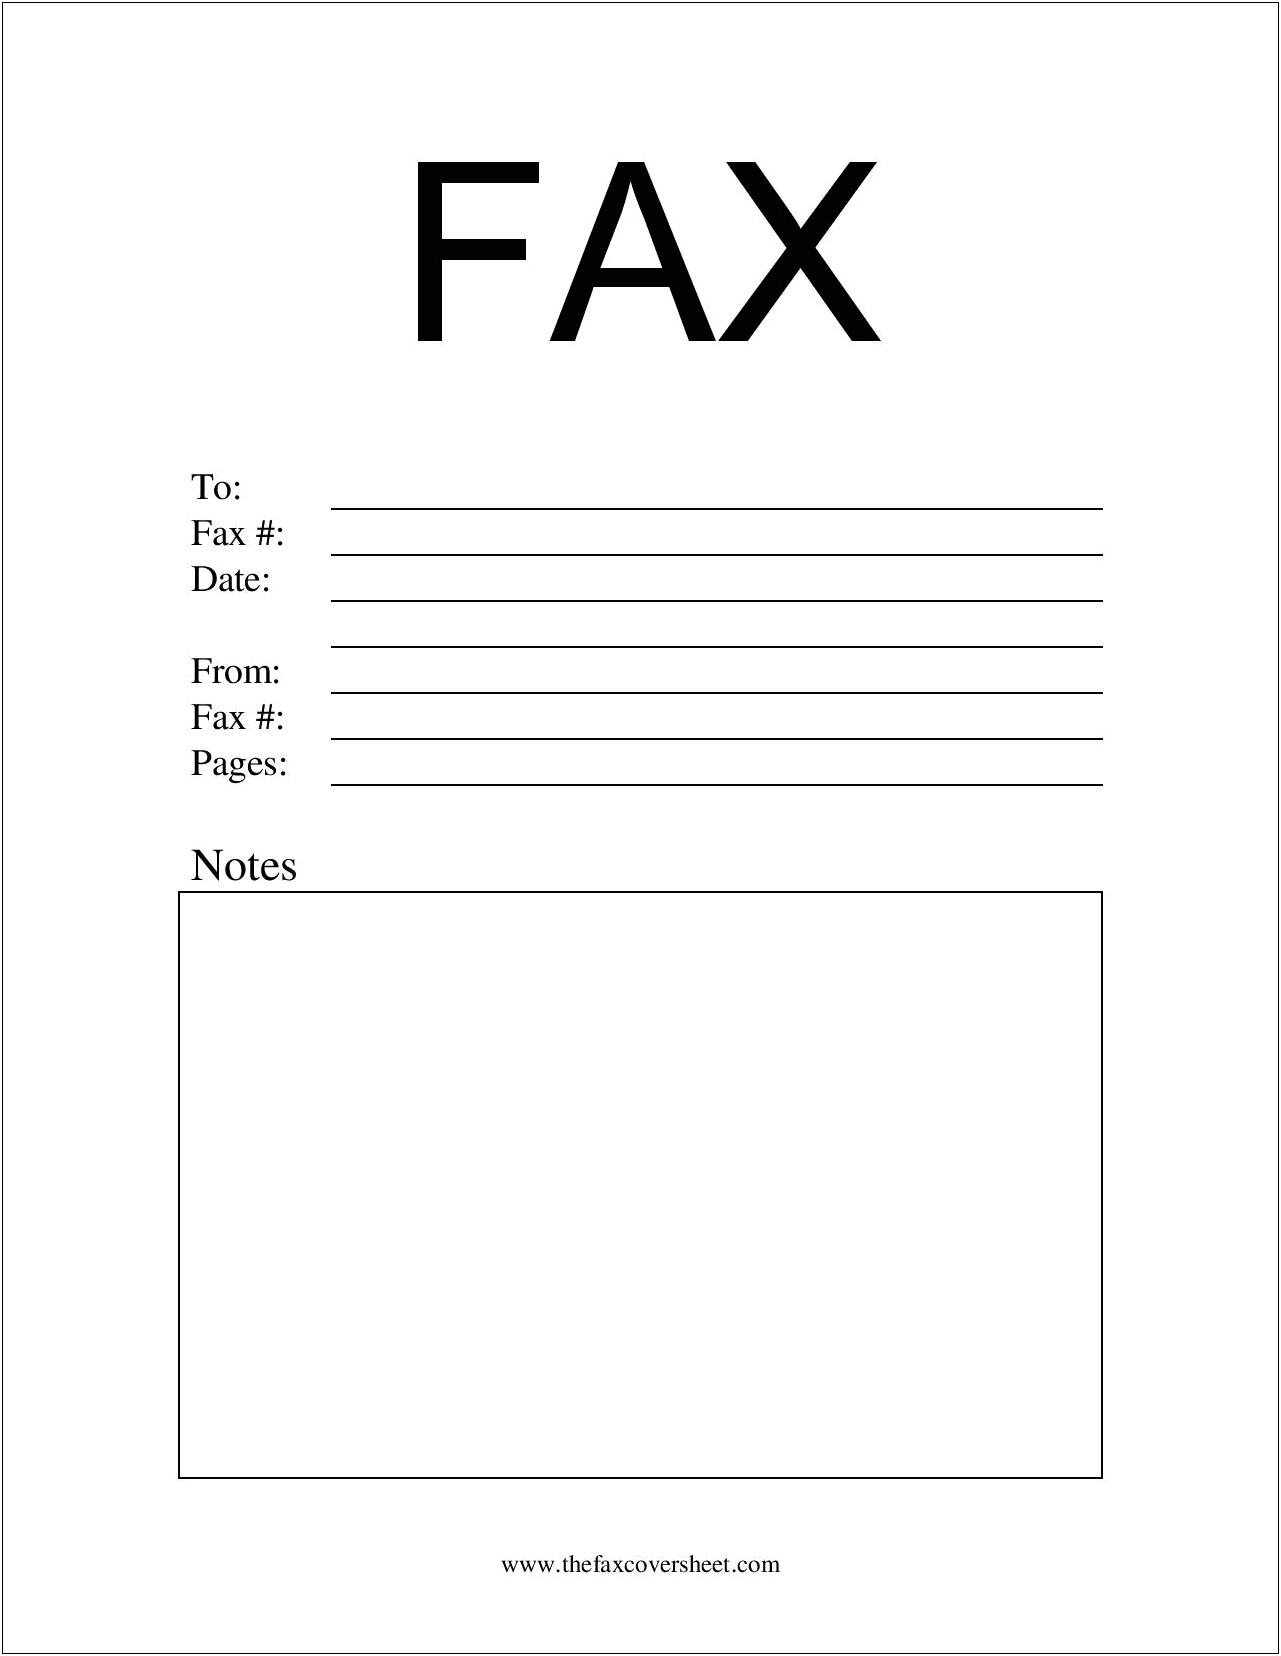 Free Fax Sheet Cover Letter Template